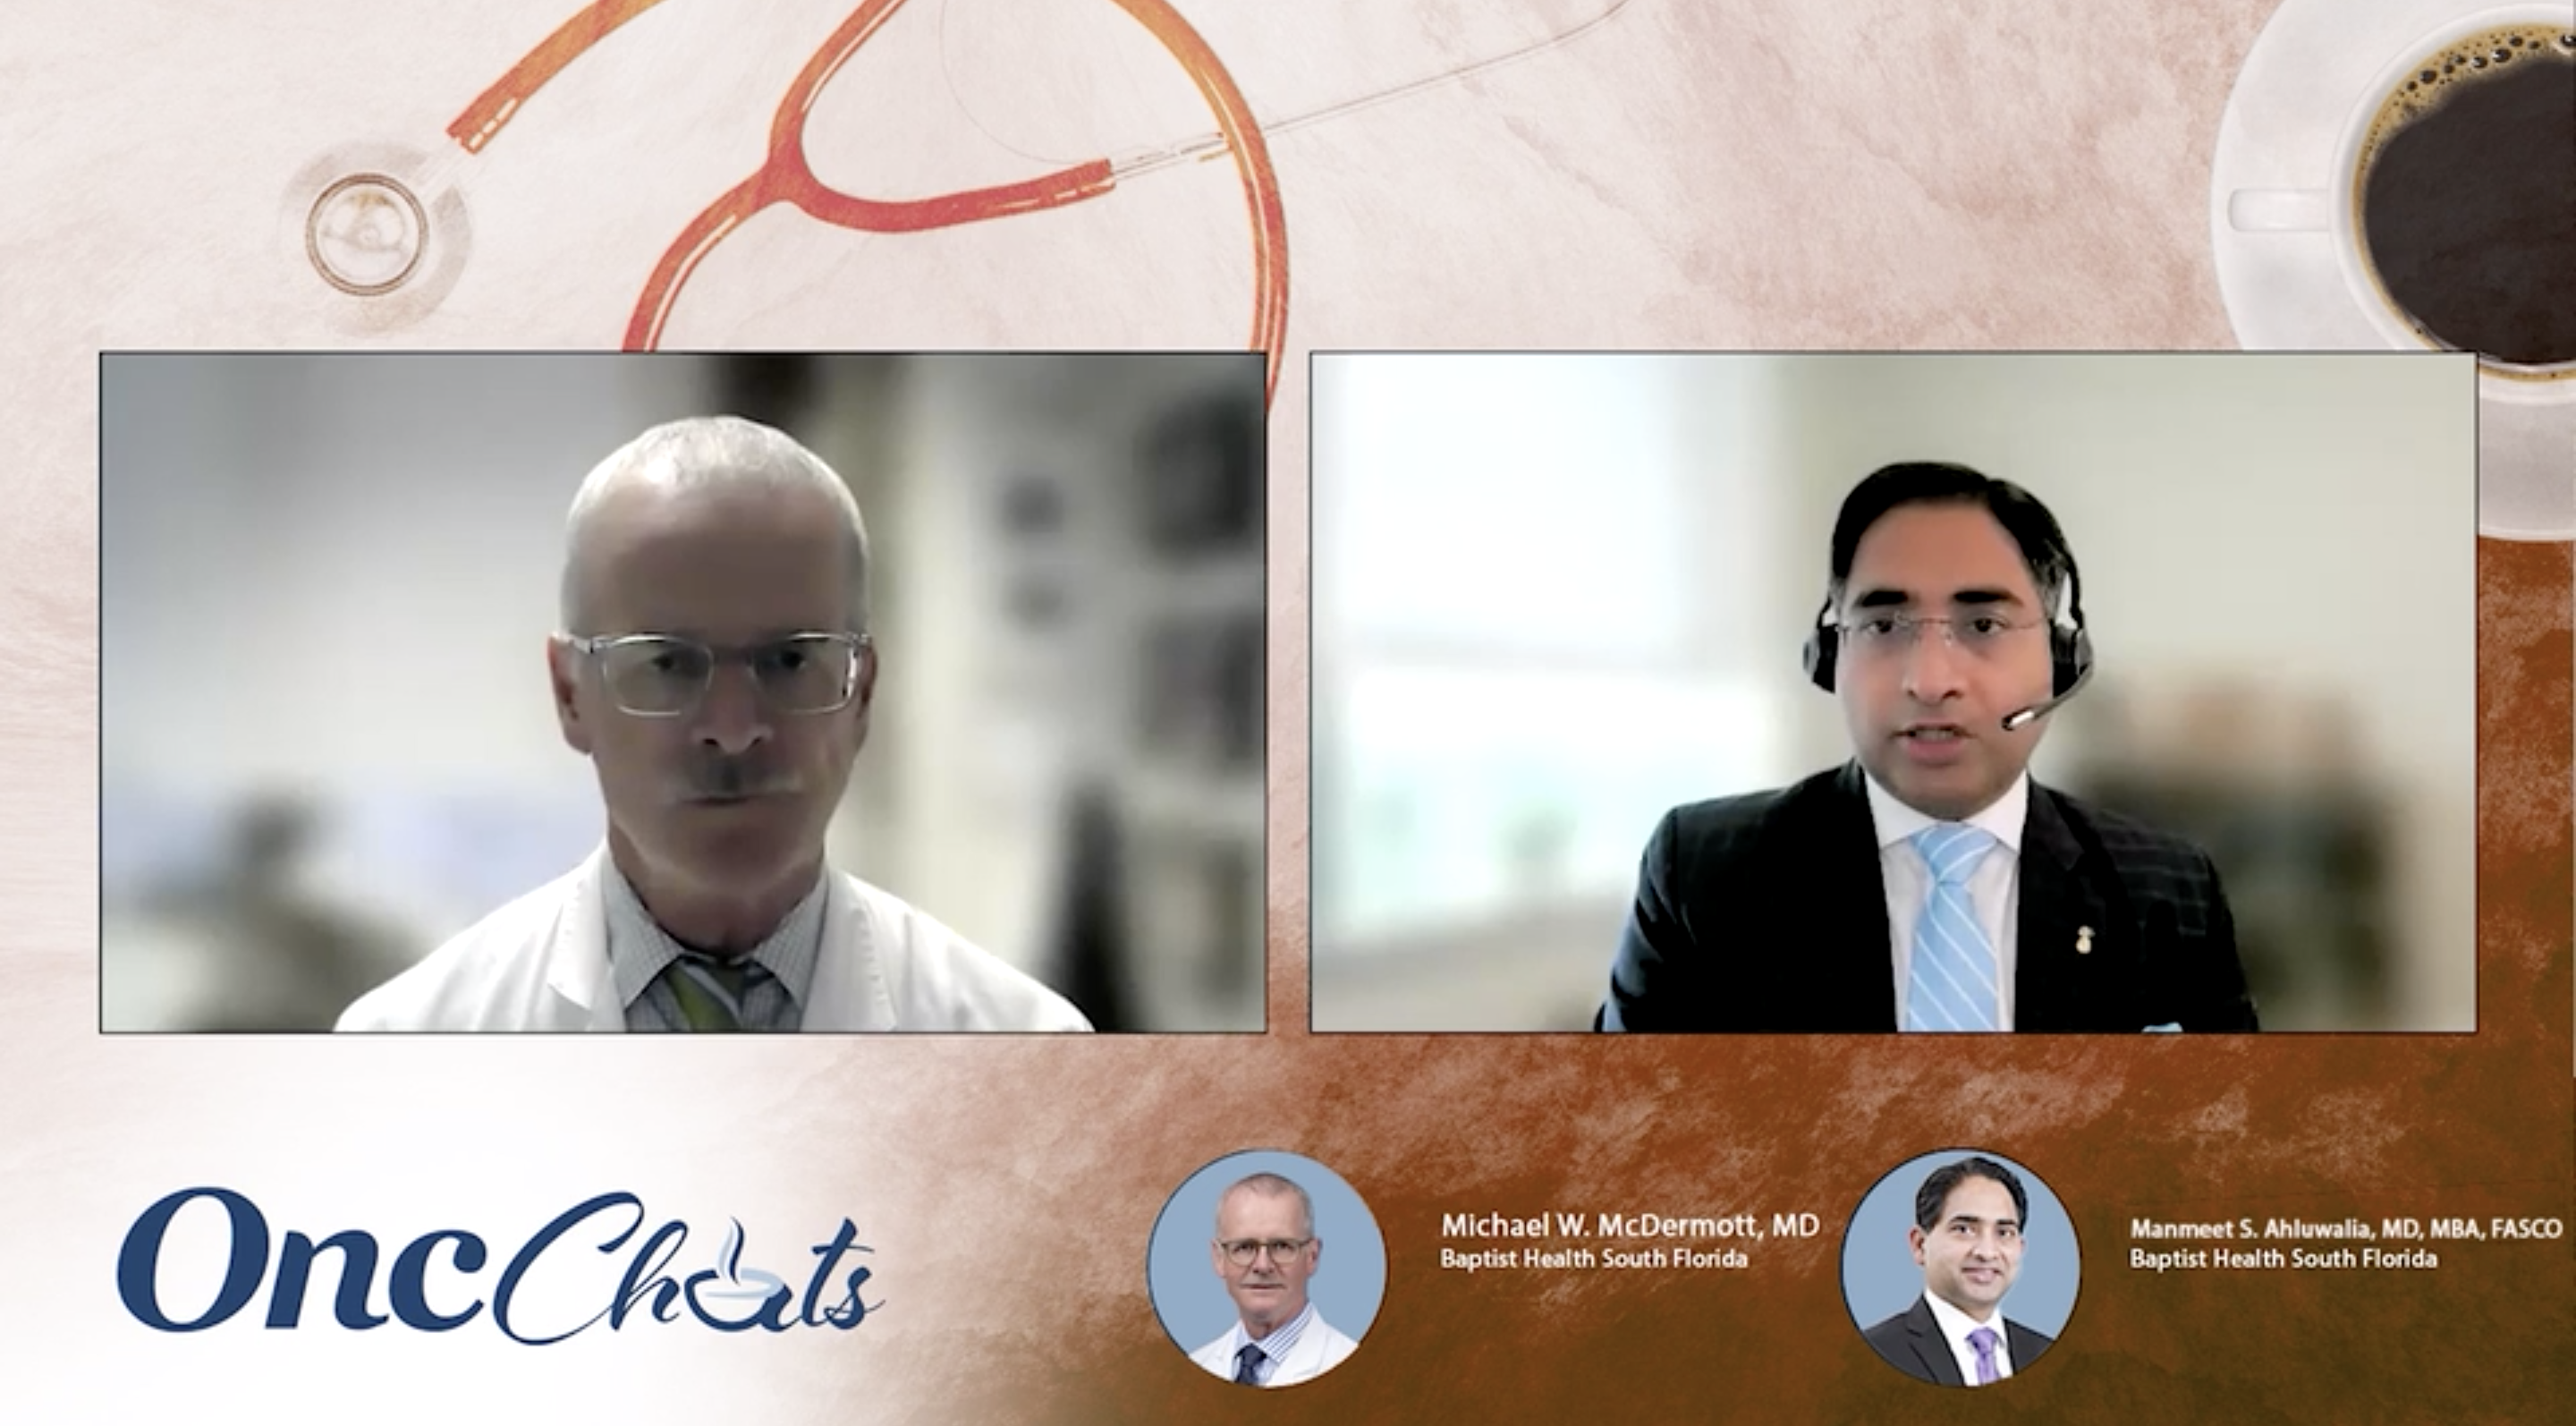 In this second episode of OncChats: Examining LIFU–Aided Liquid Biopsy in Glioblastoma, Manmeet Singh Ahluwalia, MD, and Michael W. McDermott, MD, discuss the success observed with low-intensity focused ultrasound in essential tremors and the hope for this approach in brain cancer.